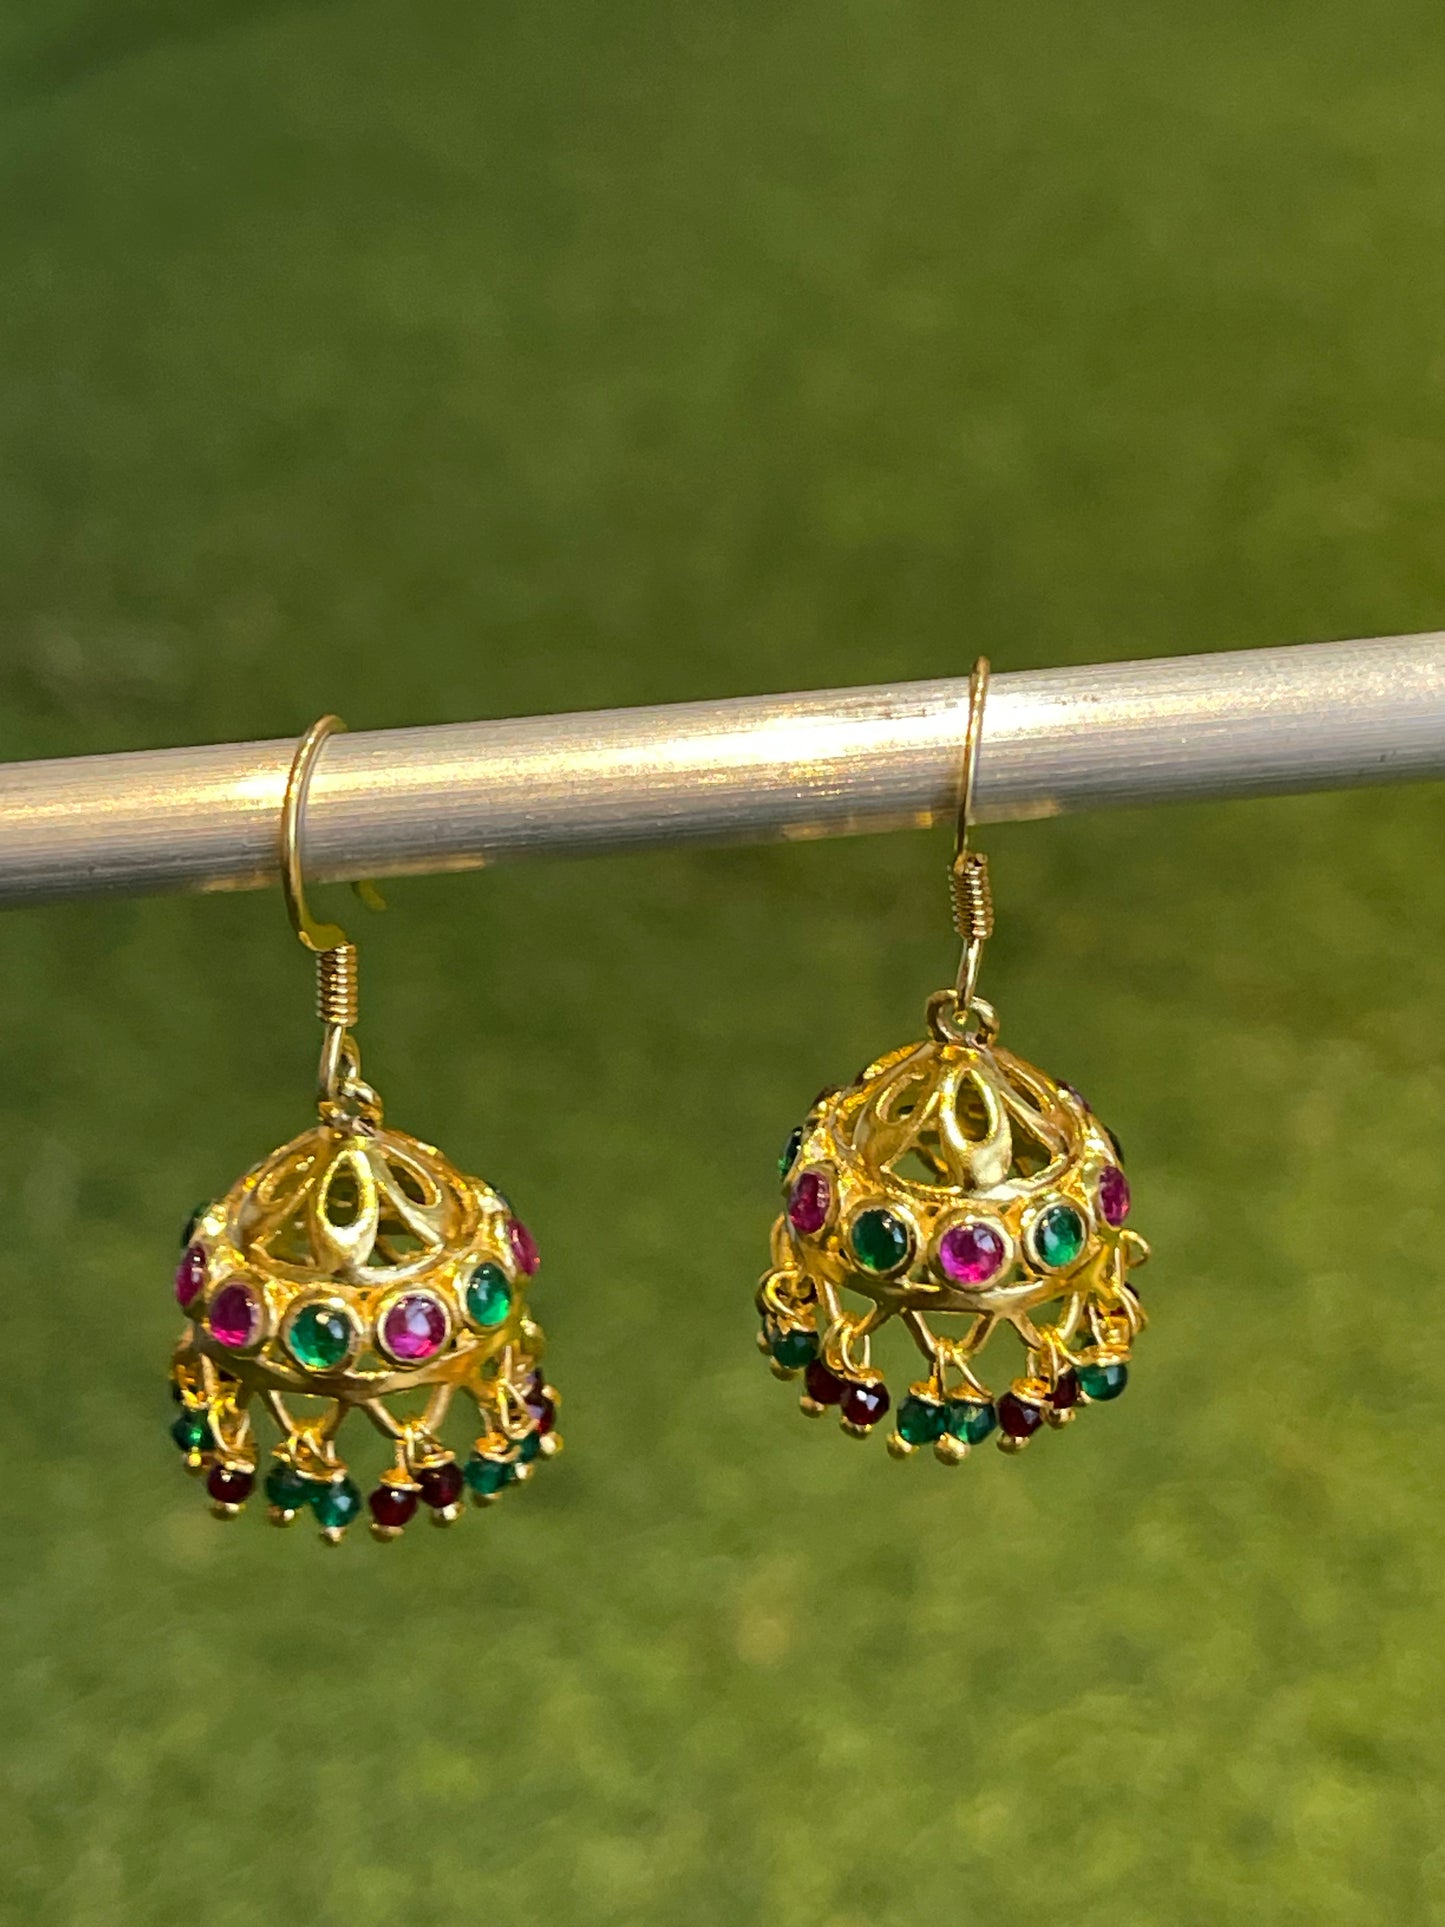 Gold polish jhumkis with pink and green stones in 92.5 sterling silver hooks earrings